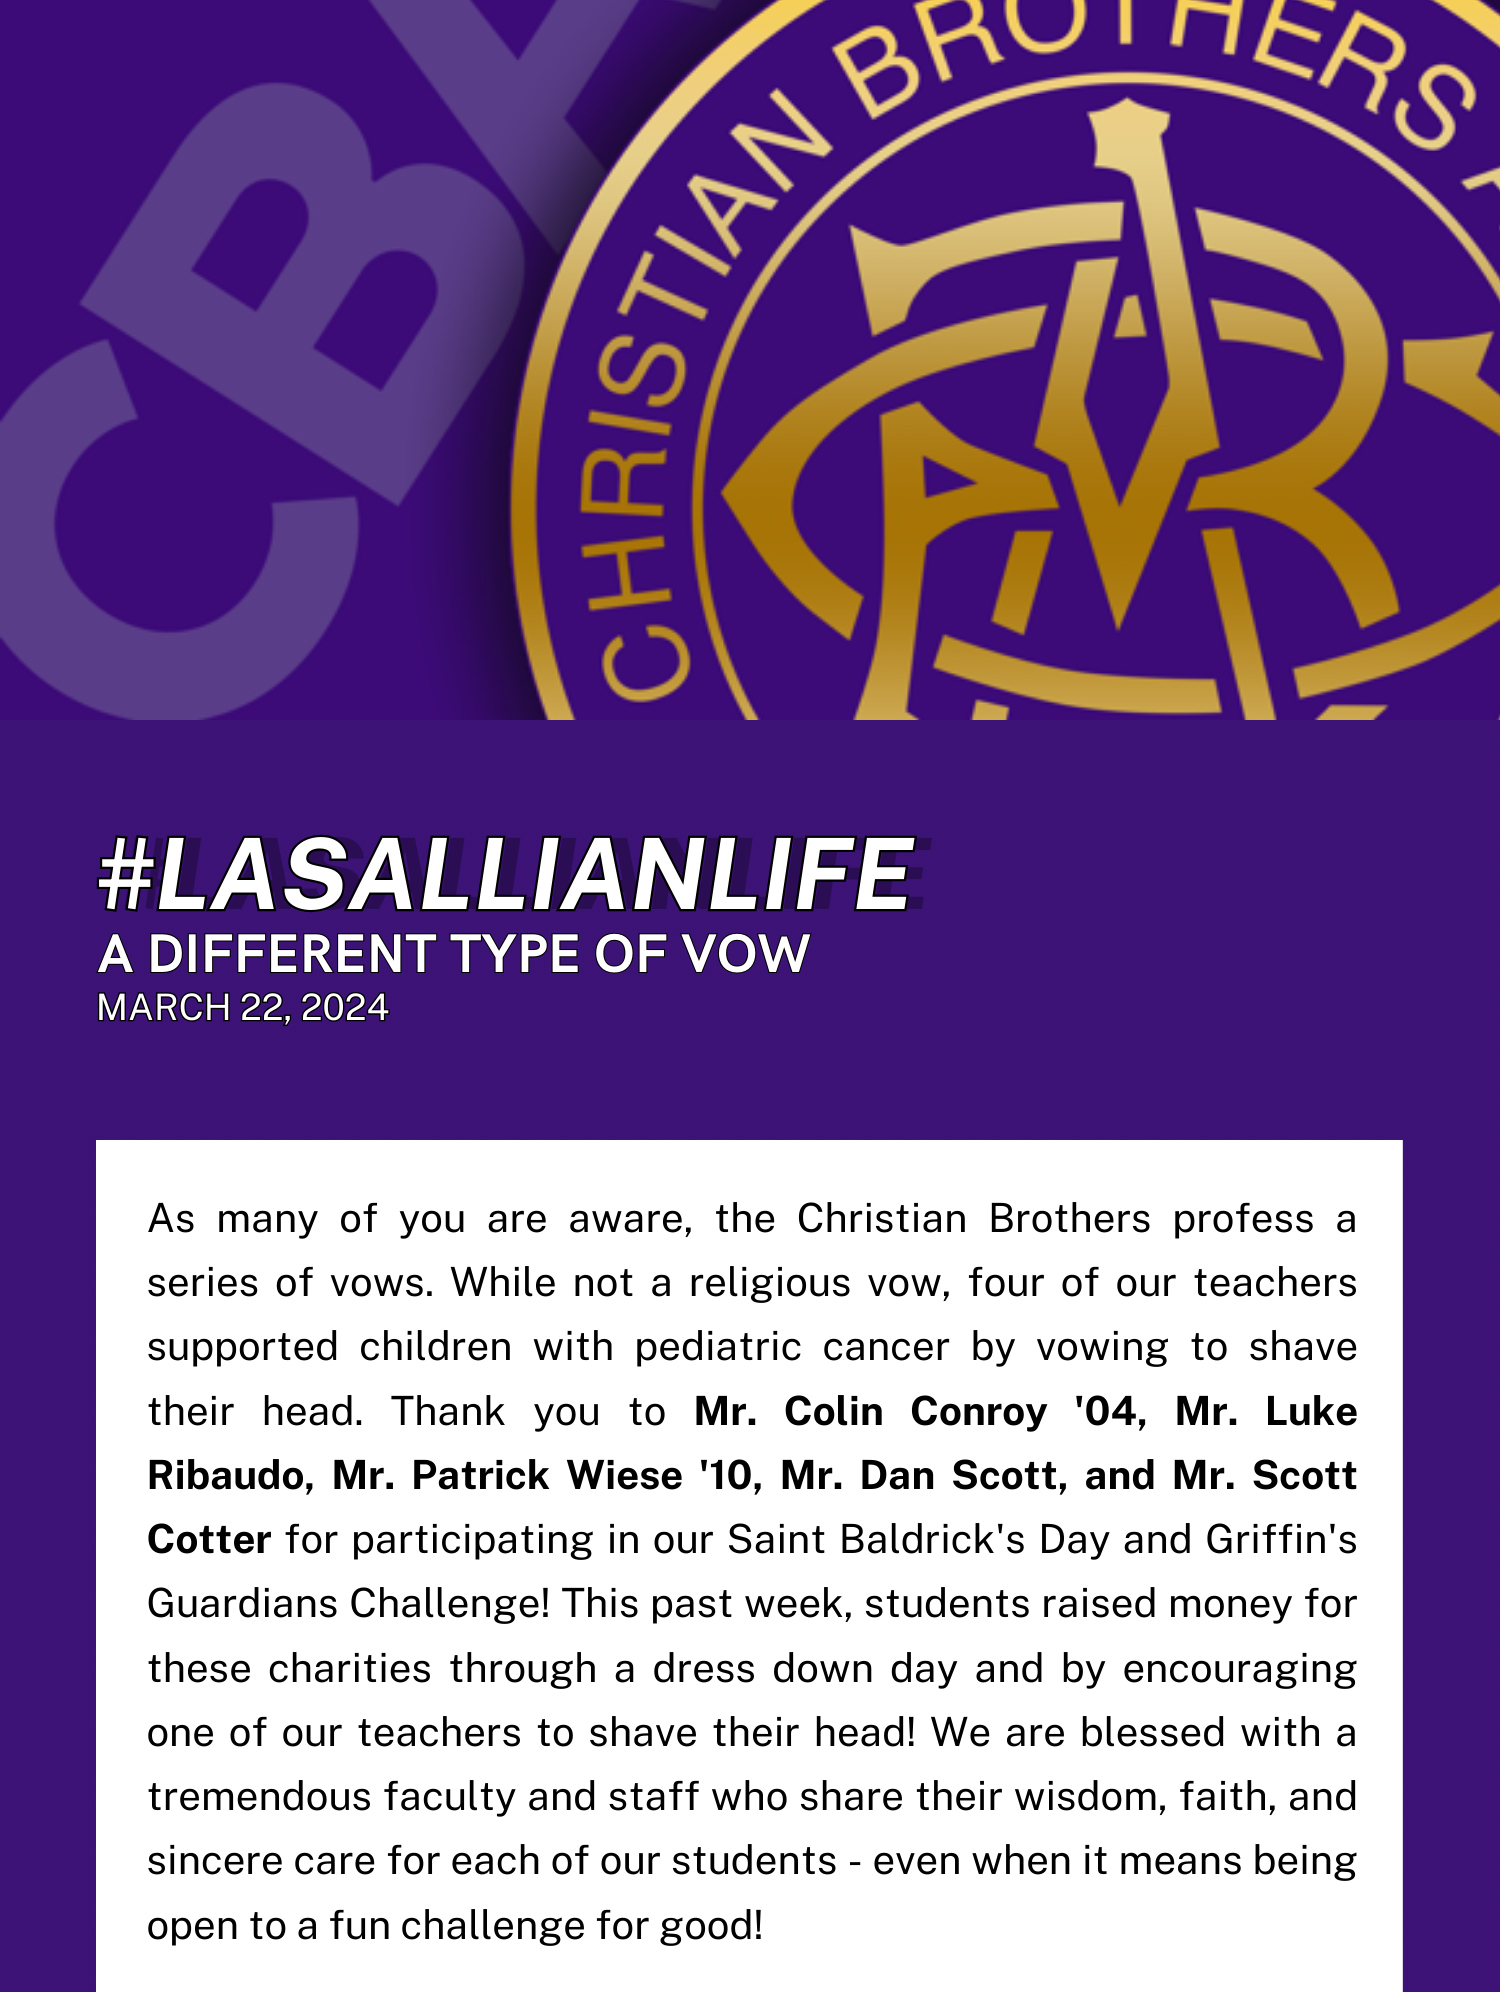 #LasallianLife :A Different Type of Vow